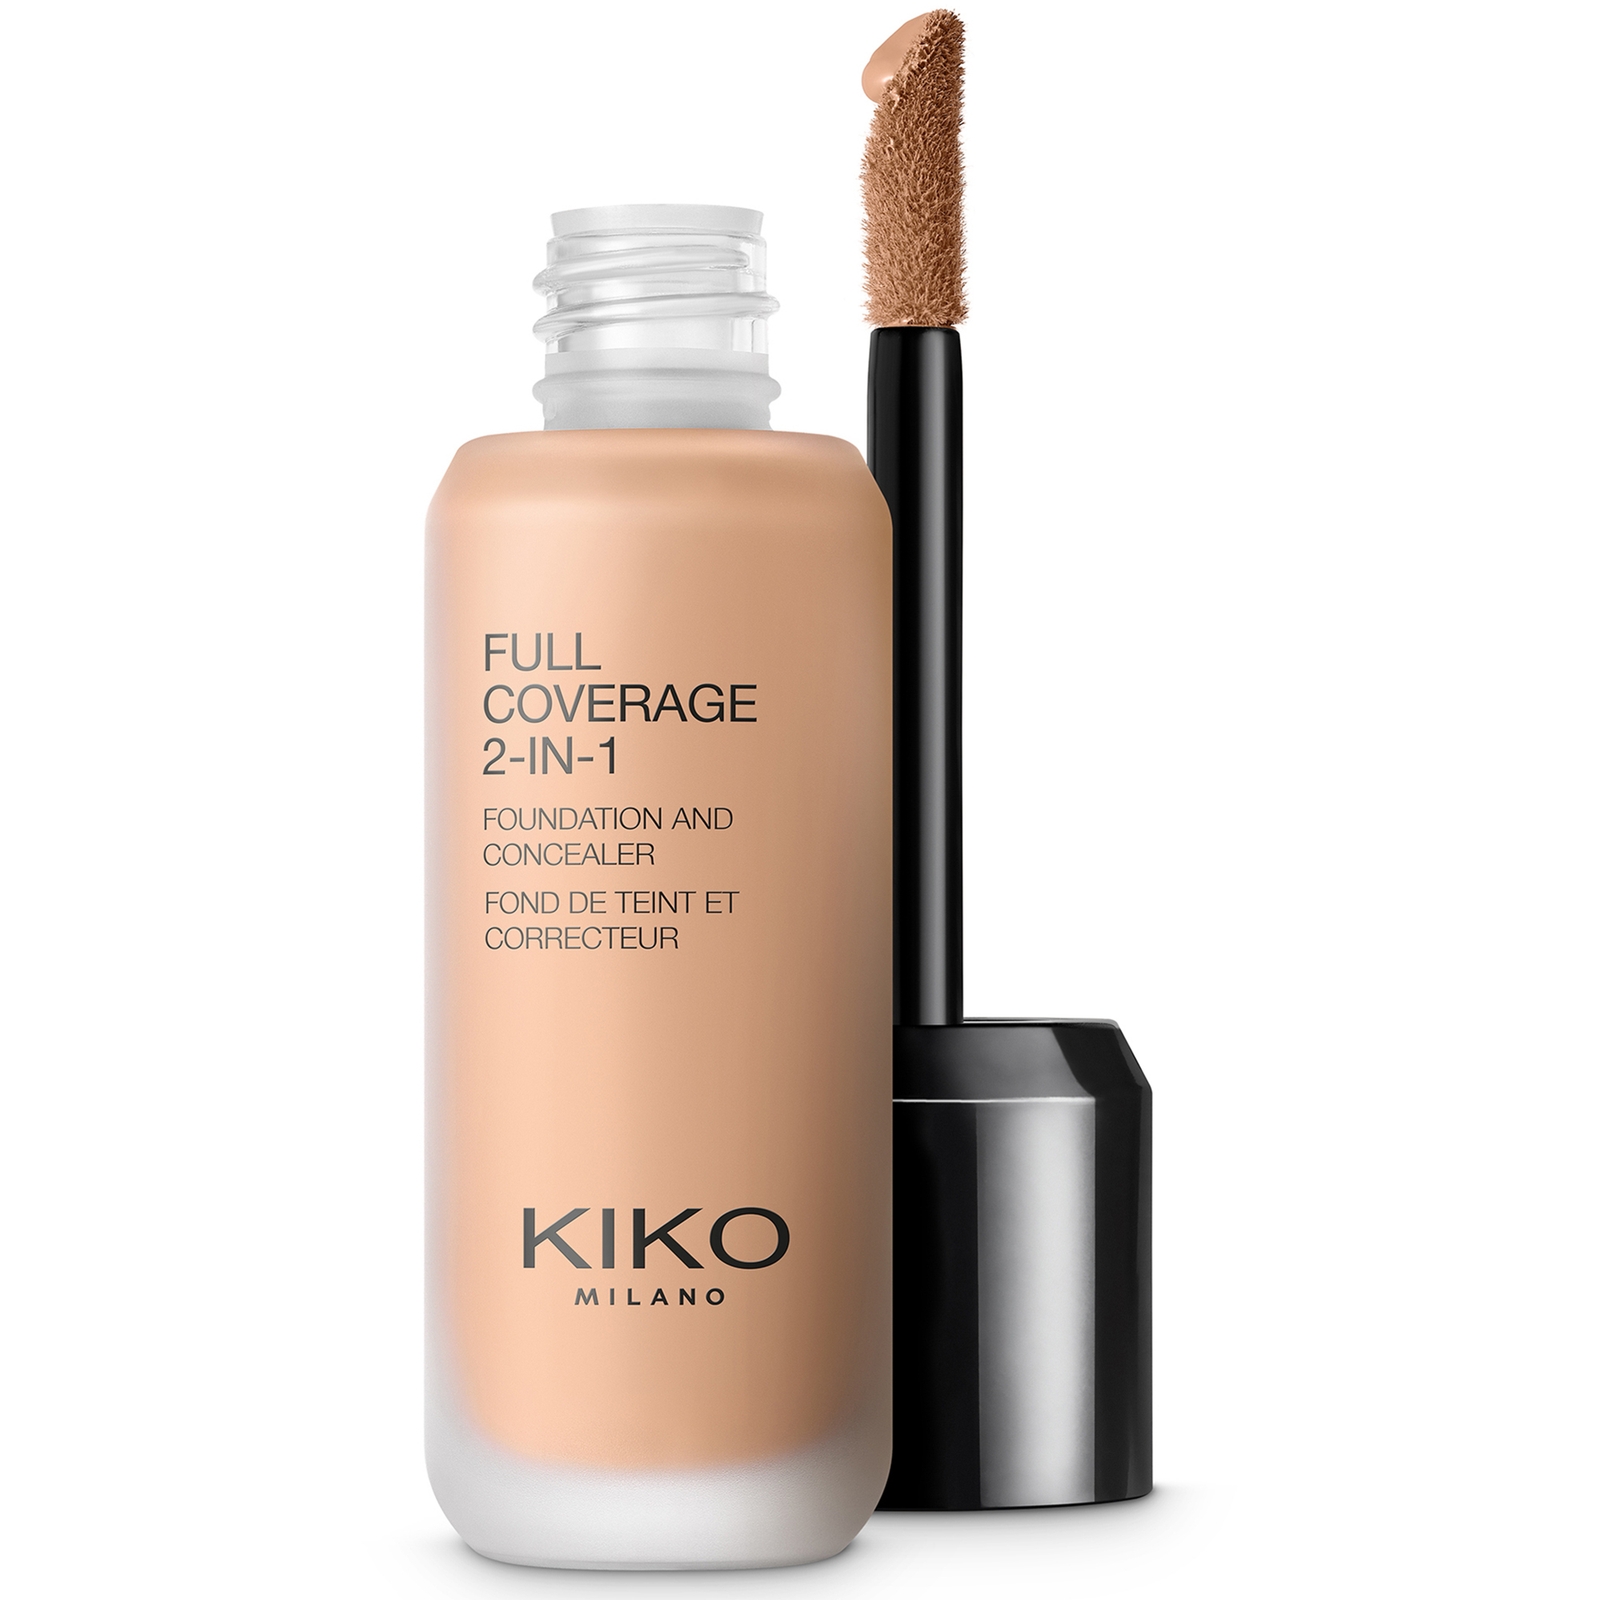 KIKO Milano Full Coverage 2-in-1 Foundation and Concealer 25ml (Various Shades) - 37 Neutral